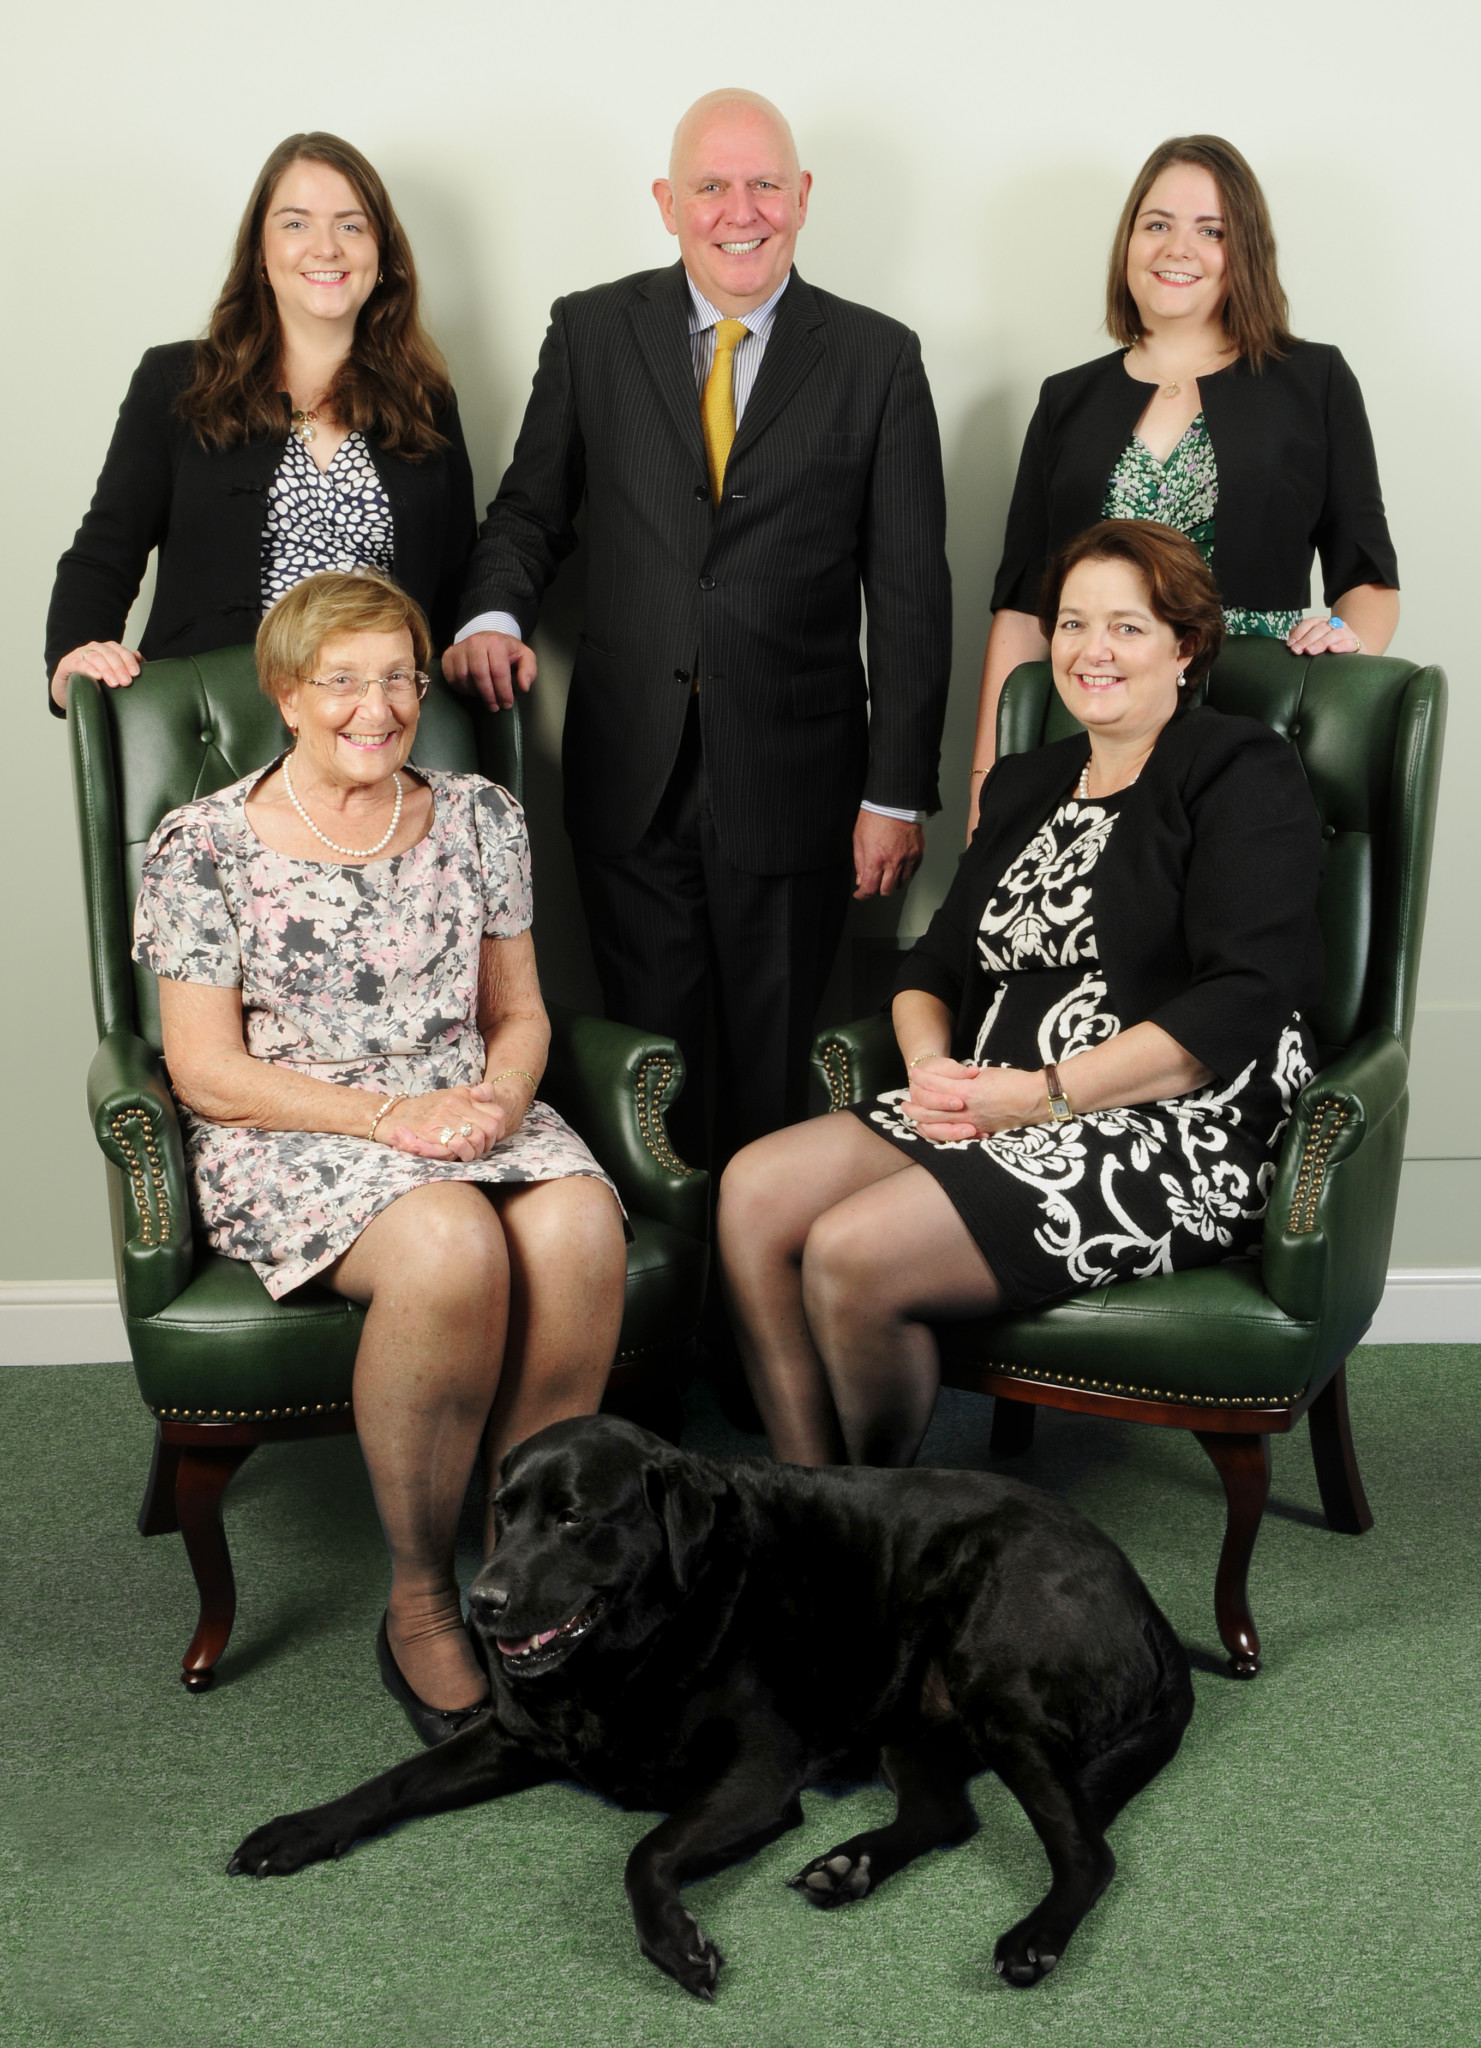 Fellows today: nicola, stephen, alexandra and jayne whittaker, muriel fellows with maddie the fellows dog.